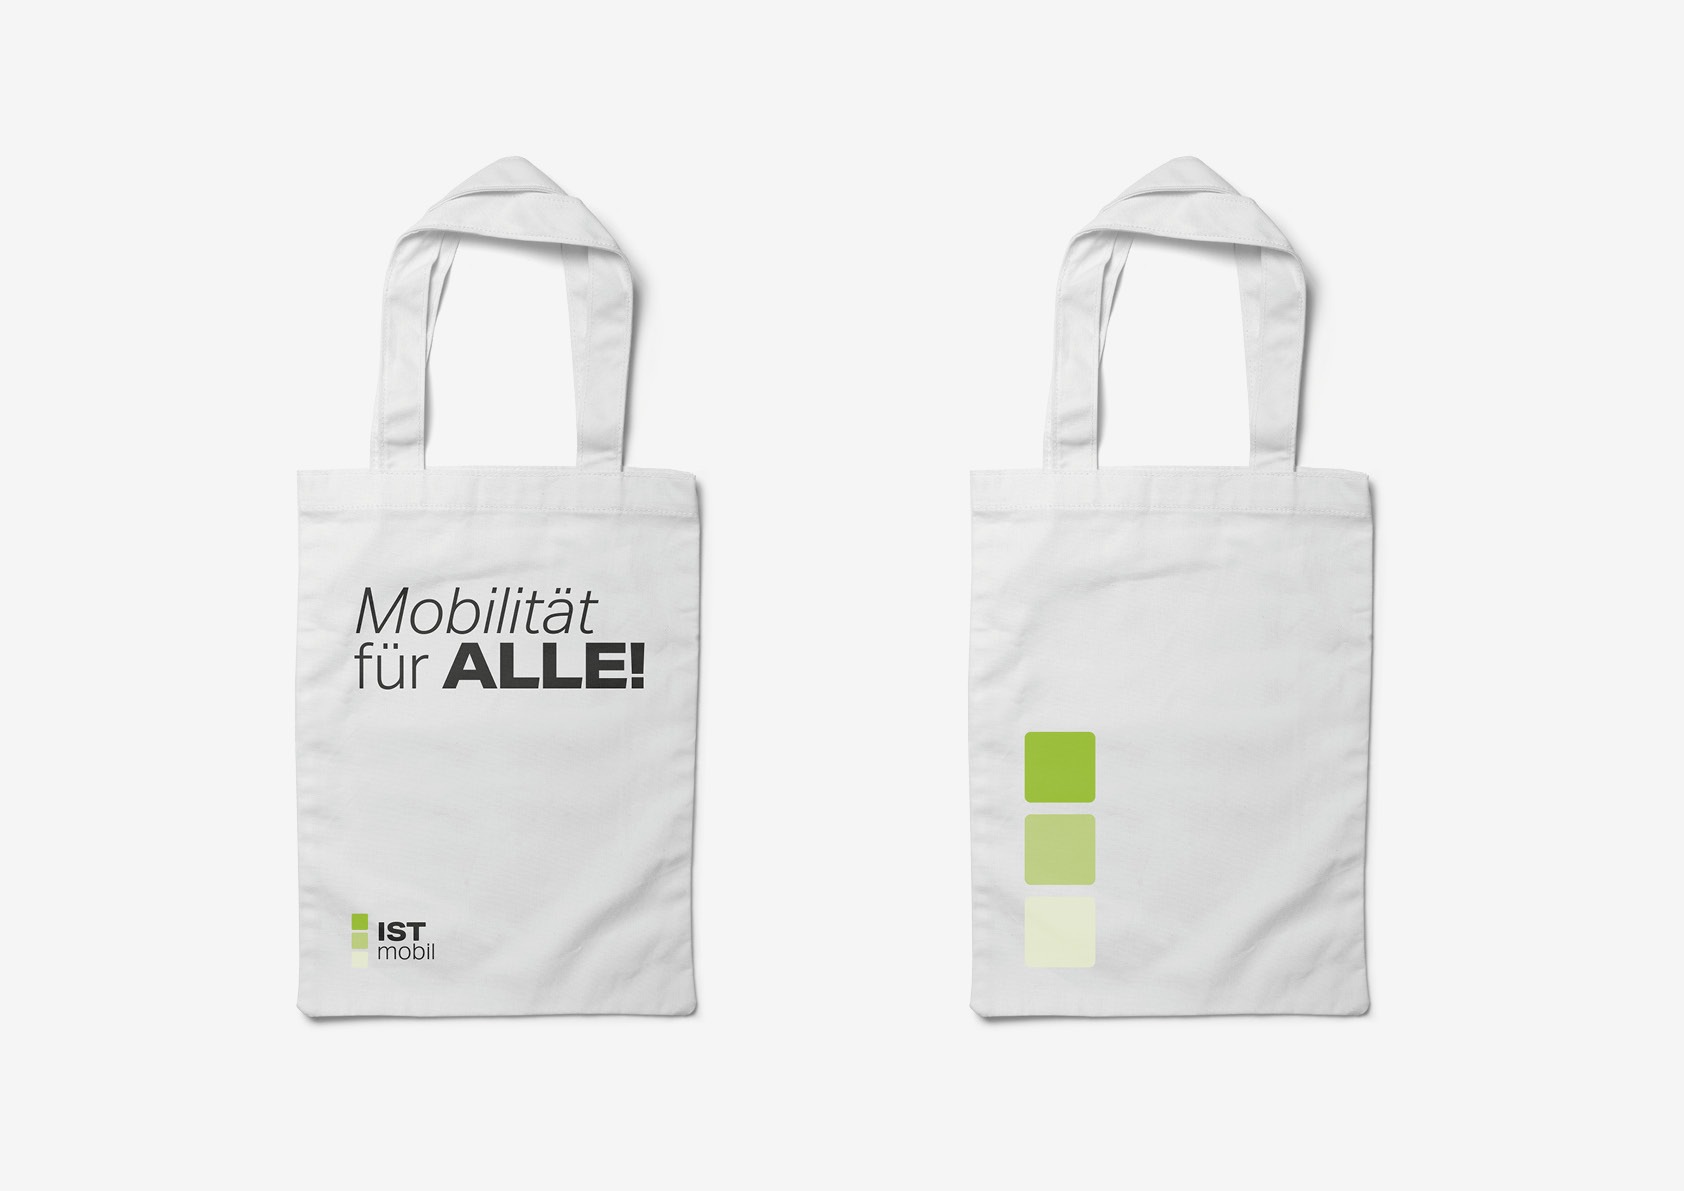 A white tote bag with a green ISTmobil logo.